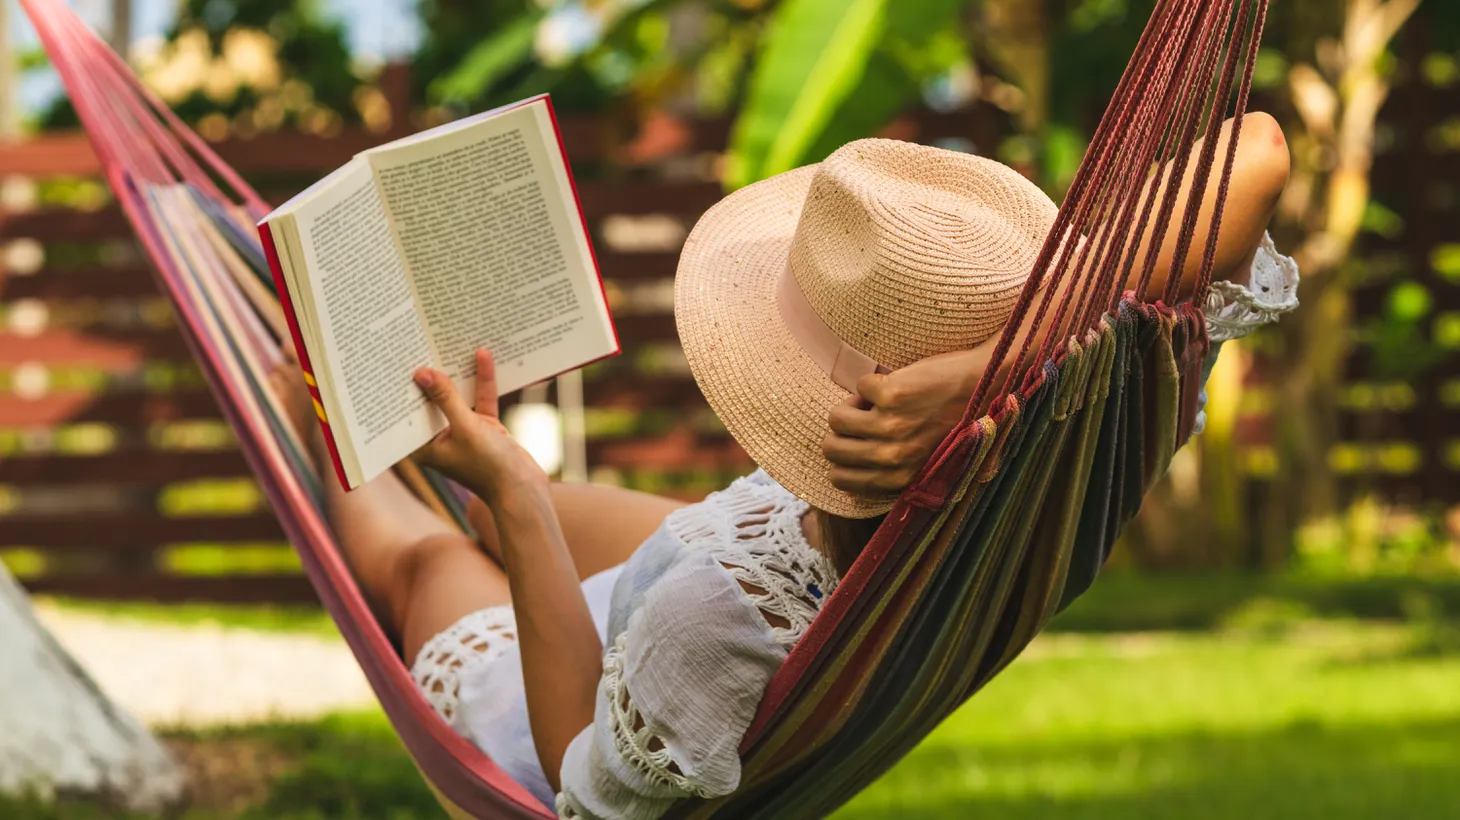 Summer is almost here, and you might have a little time to unwind with a book.